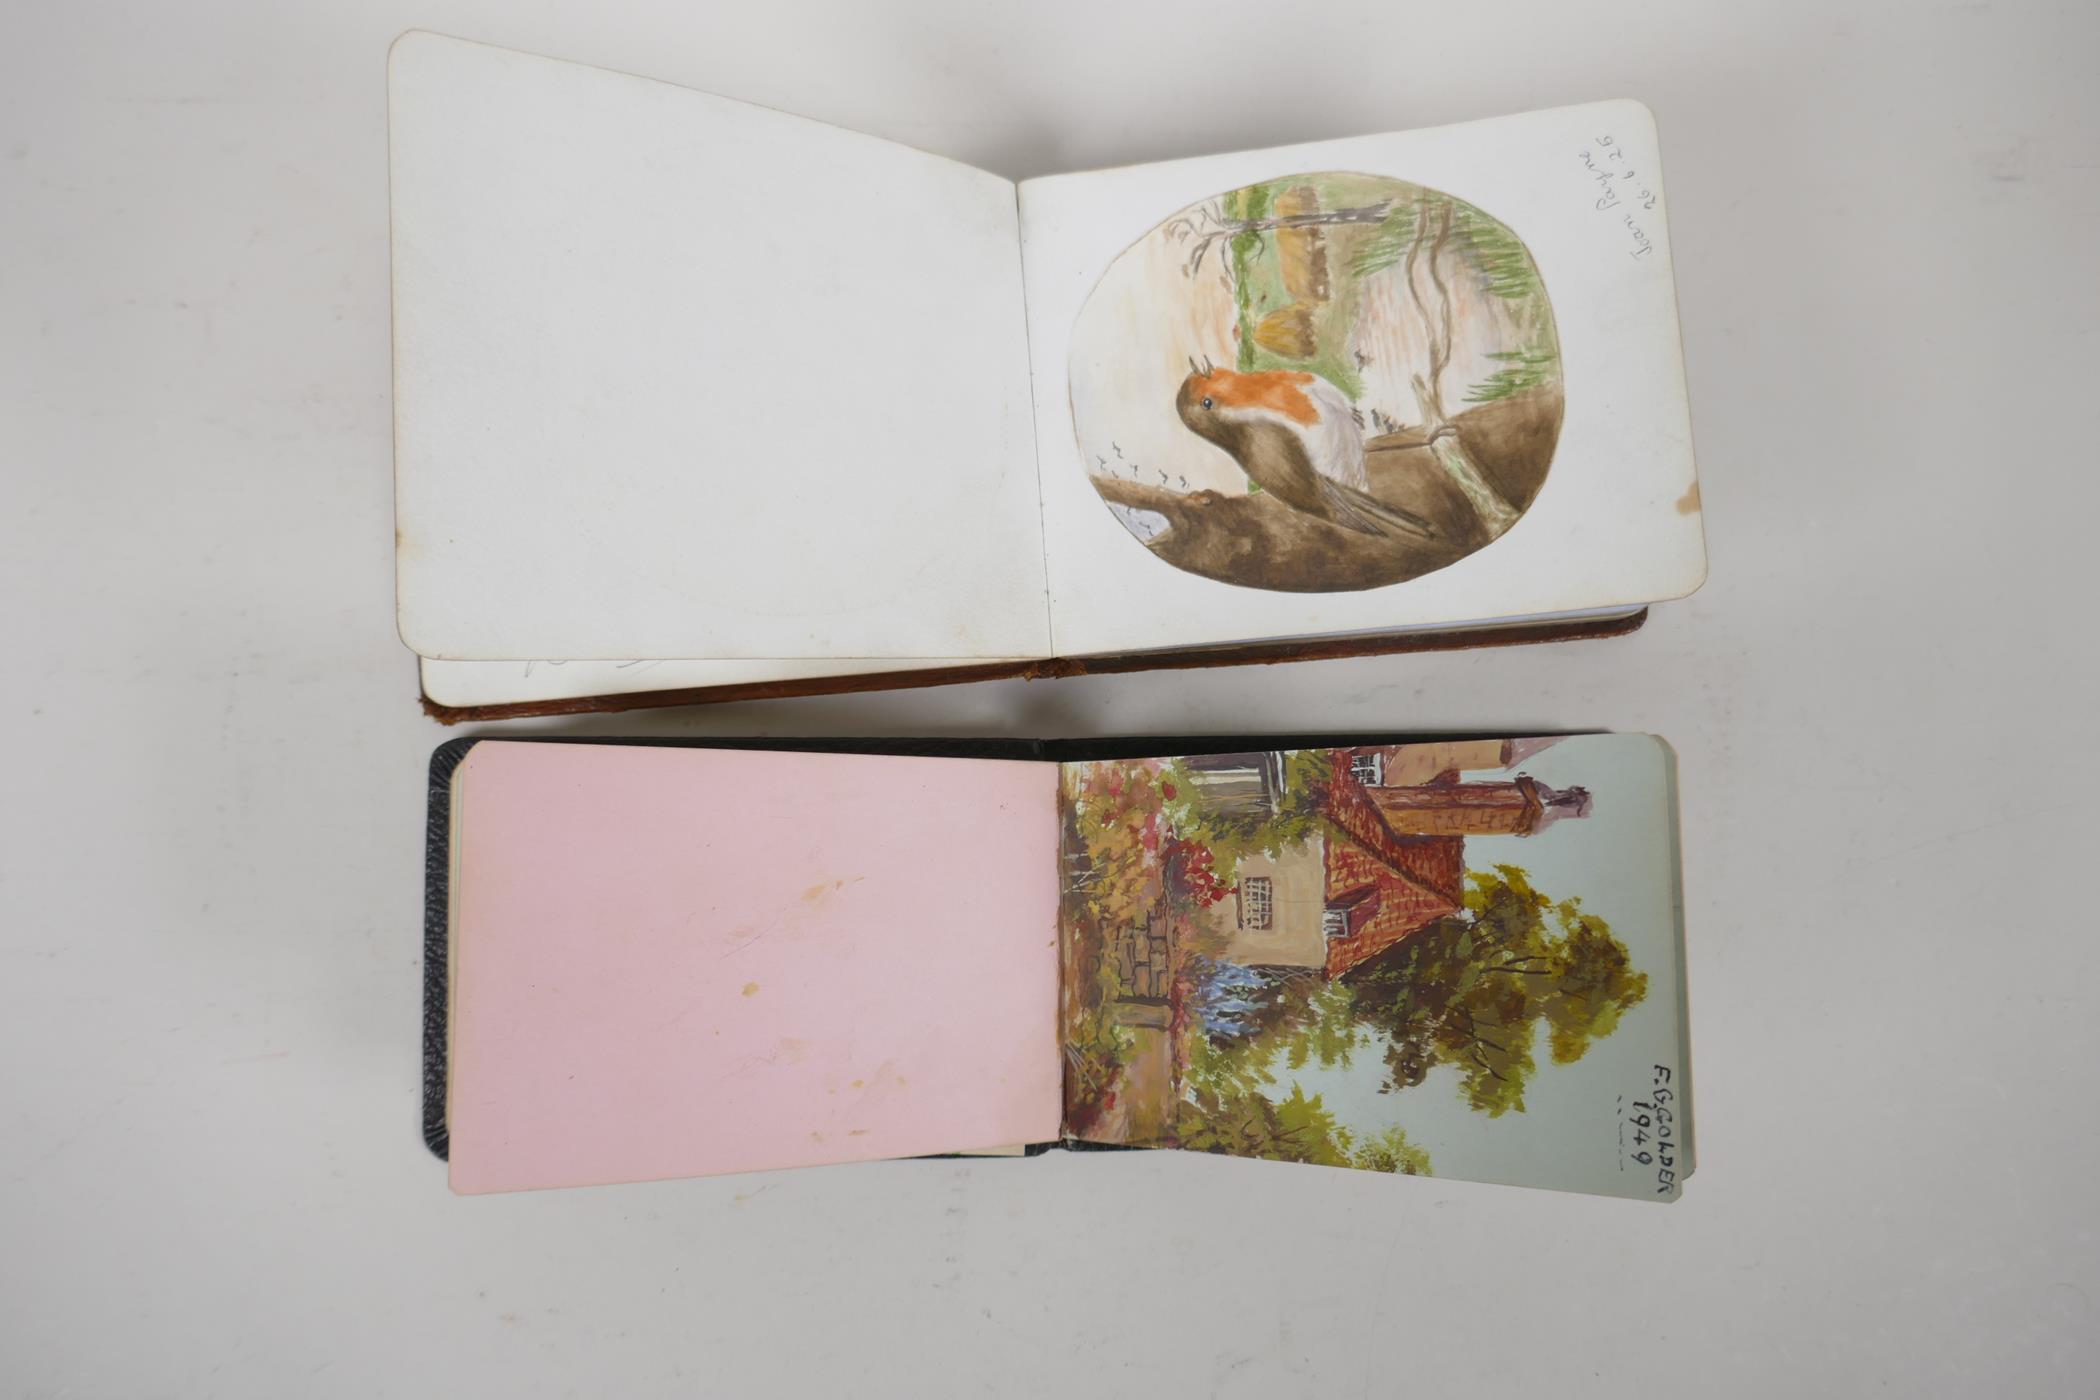 Two early to mid C20th autograph albums containing sketches, watercolours and oils, largest 5½" x - Image 2 of 5